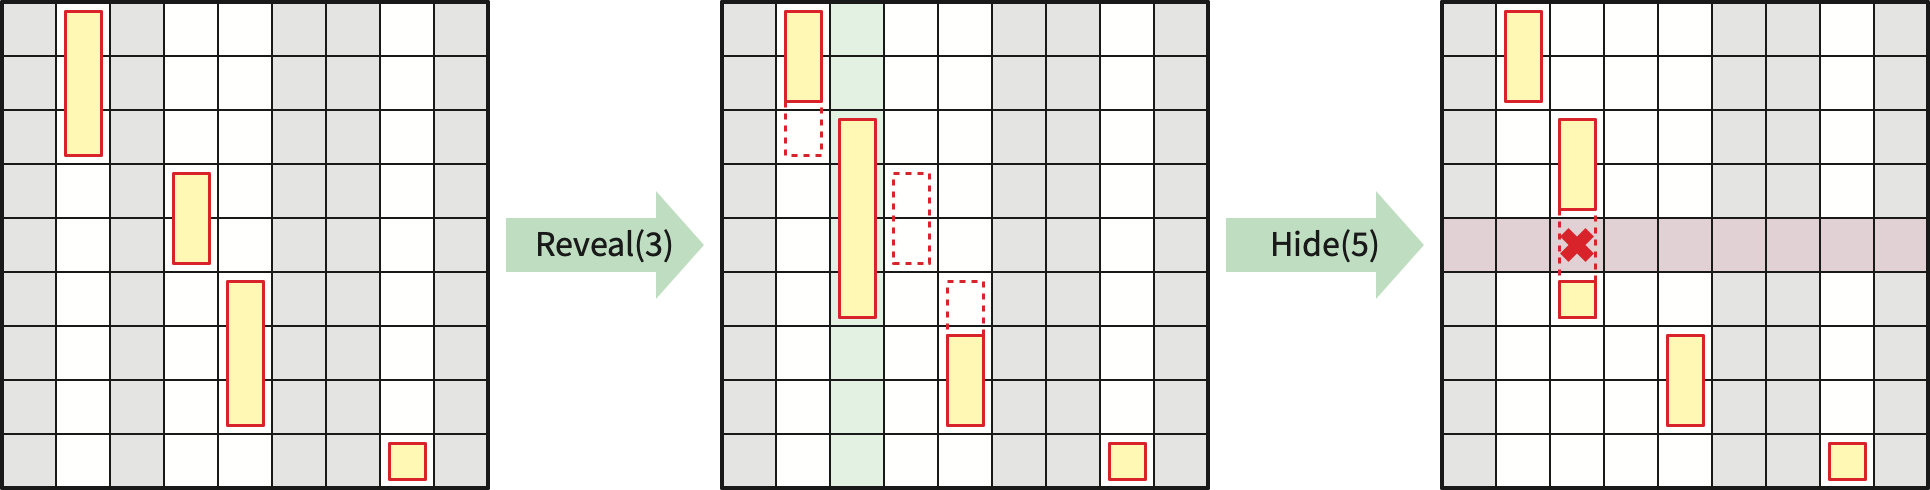 Operations on a Monge heap, initially with four visible columns and no hidden rows.